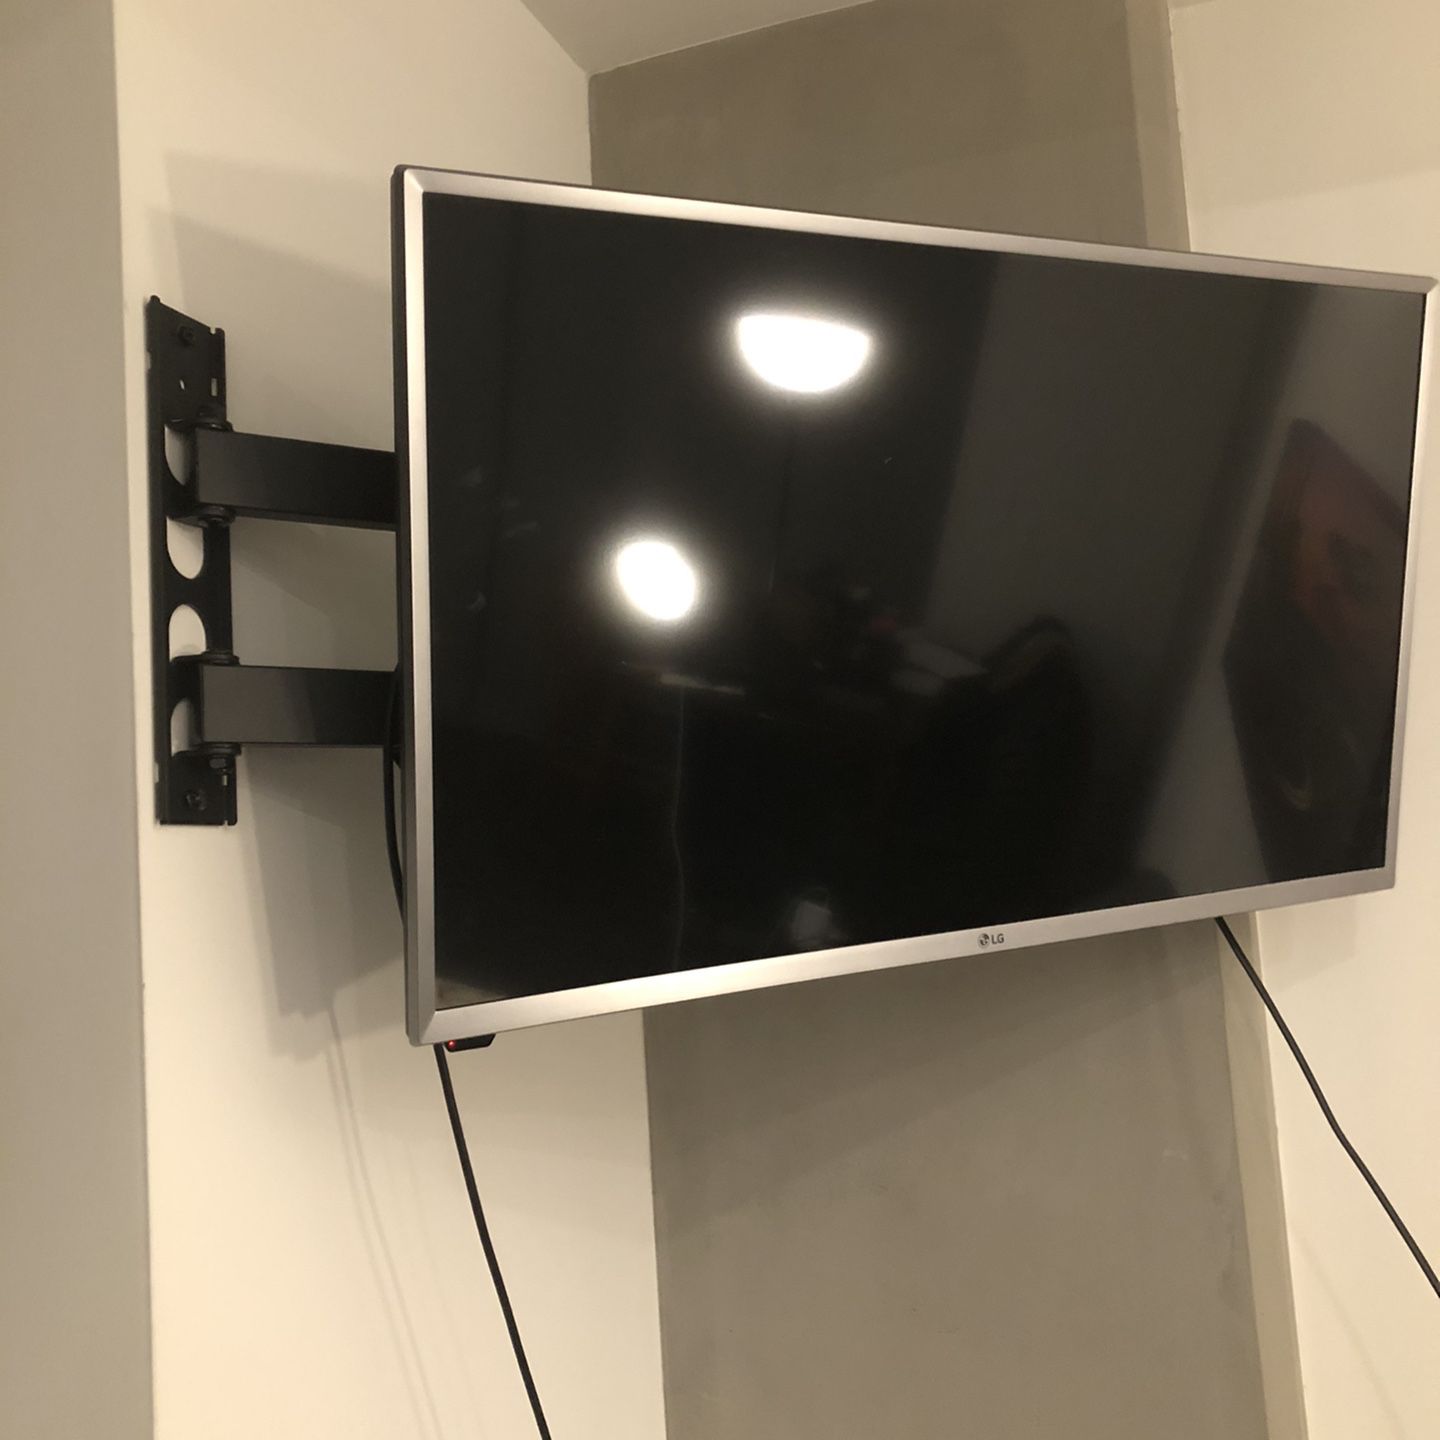 32-inch LG TV and Wall Mount